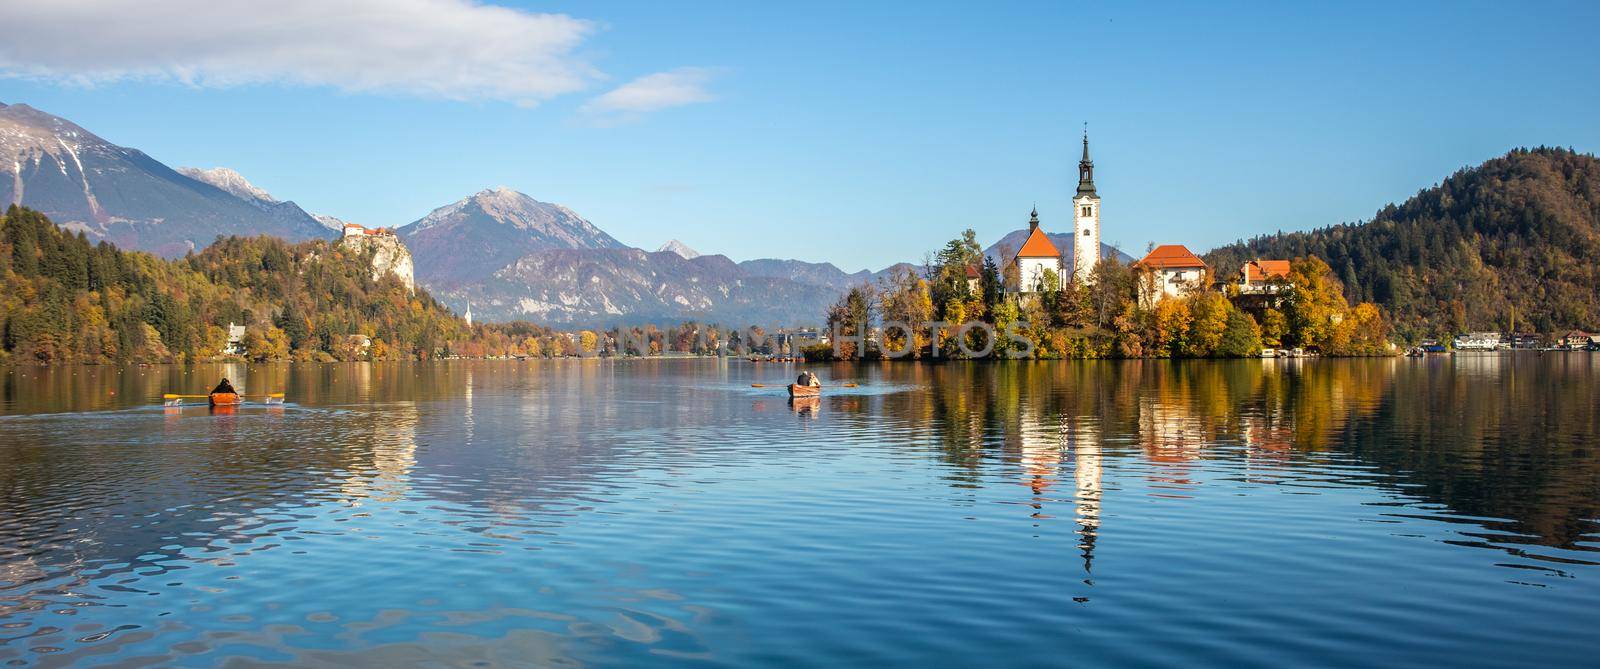 Panoramic view of Lake Bled with St. Marys Church of the Assumption on the small island. Bled, Slovenia, Europe. by kasto